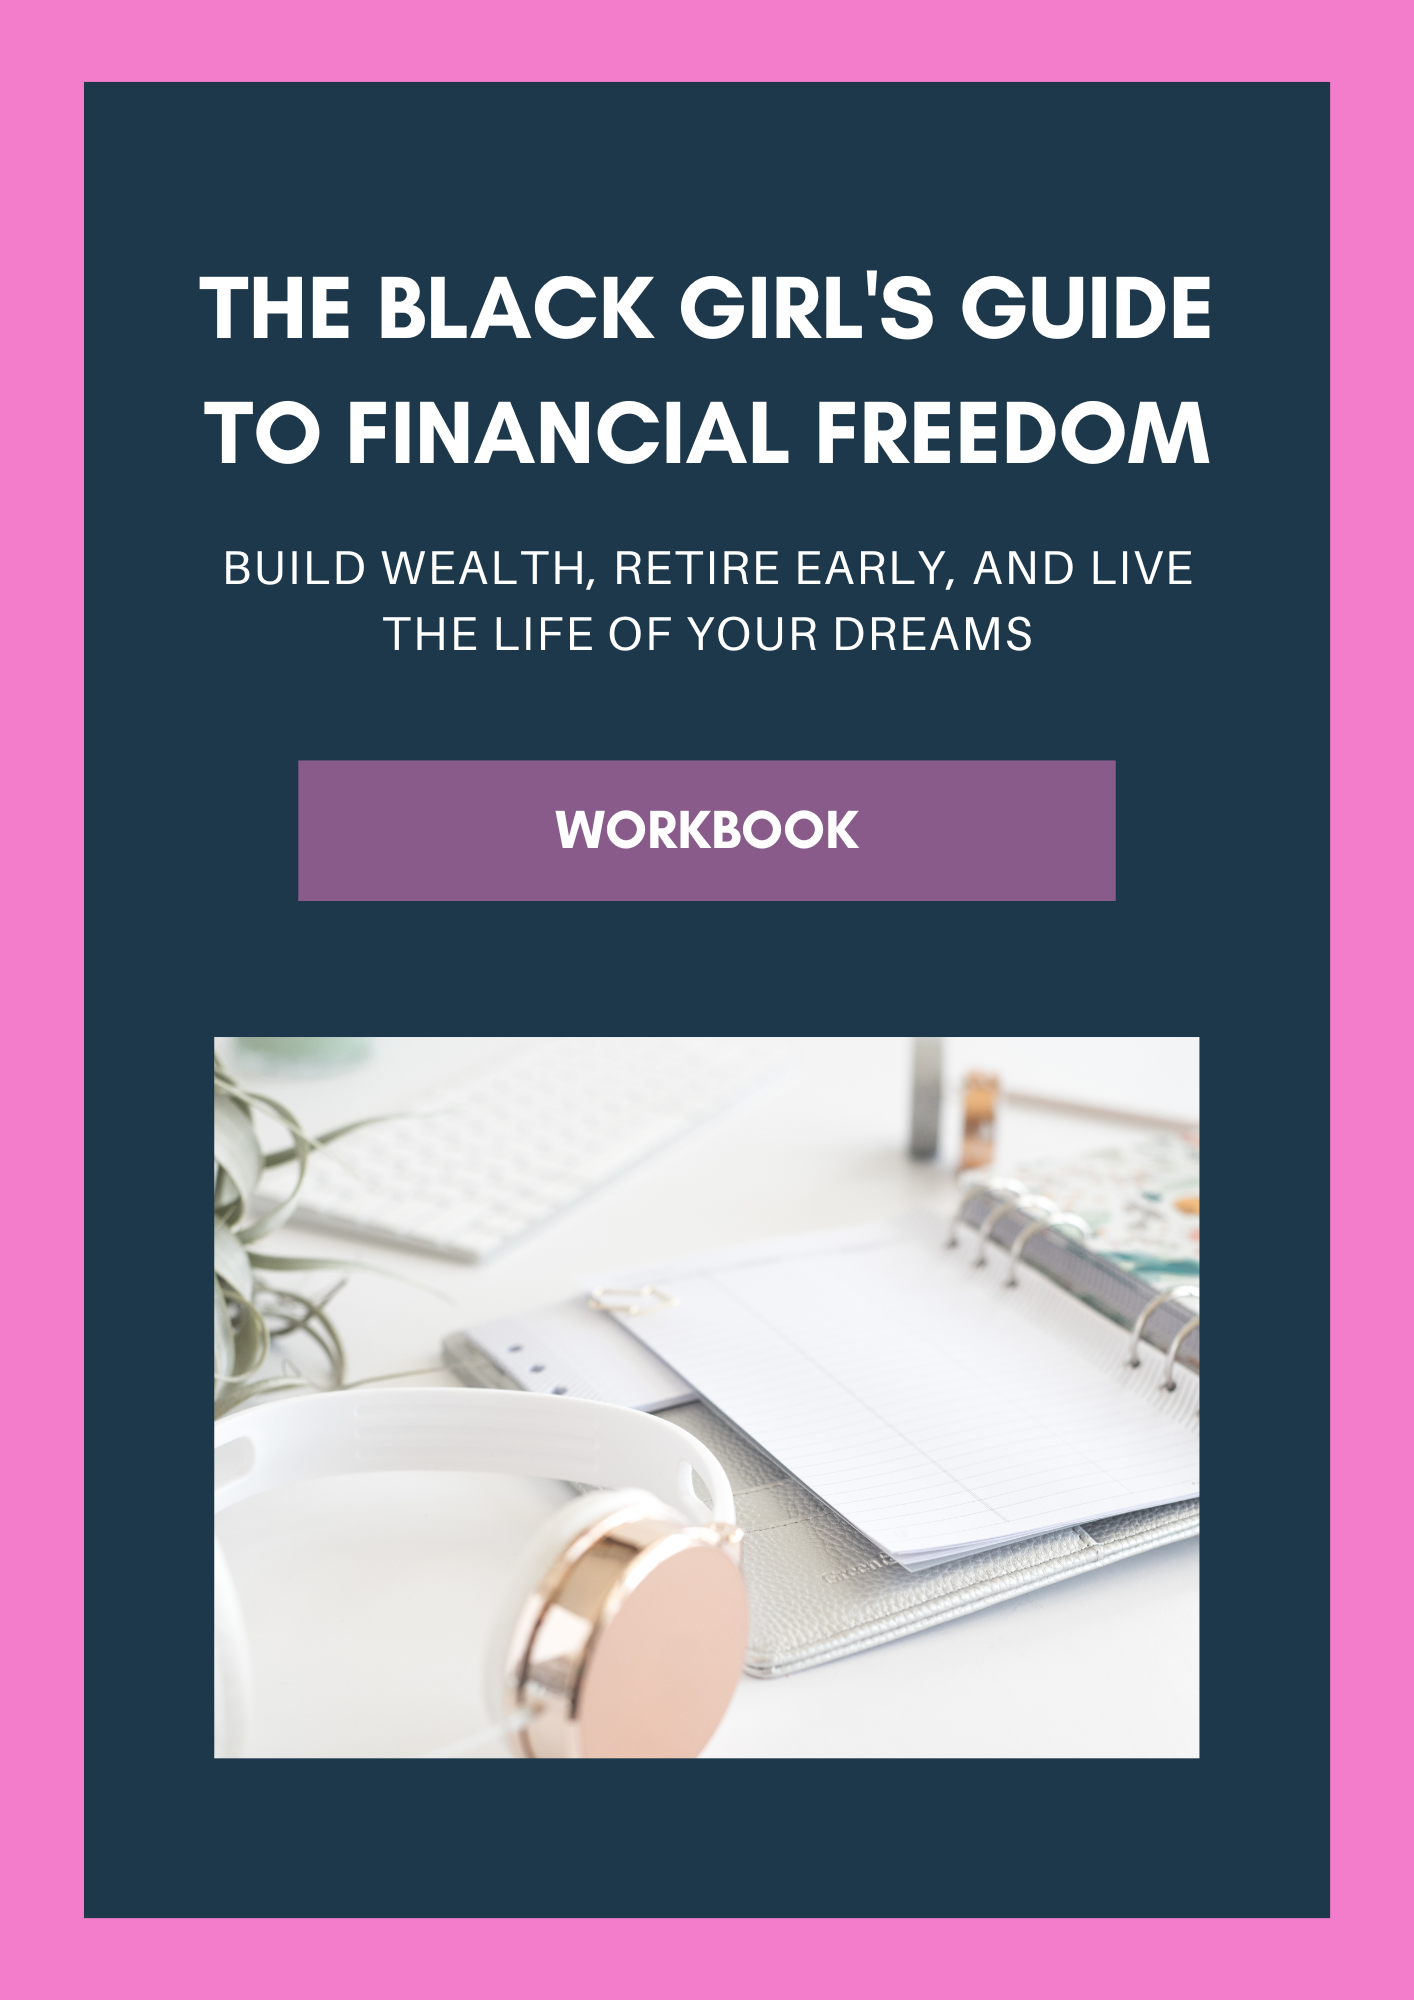 The Black Girl's Guide to Financial Freedom Companion Workbook